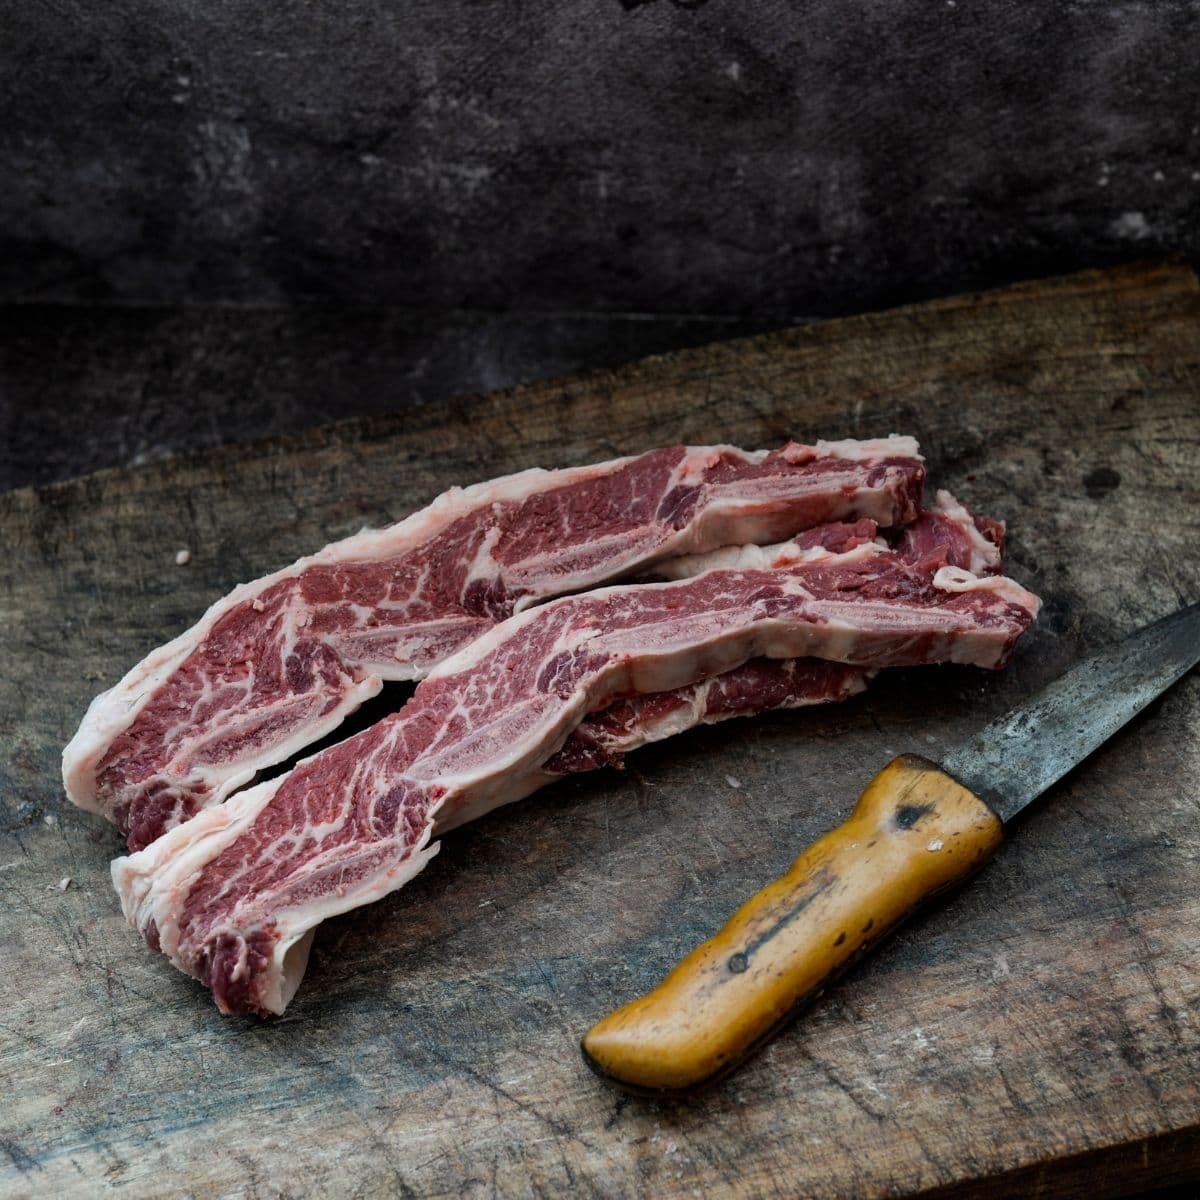 strips of meat next to a knife on chopping board